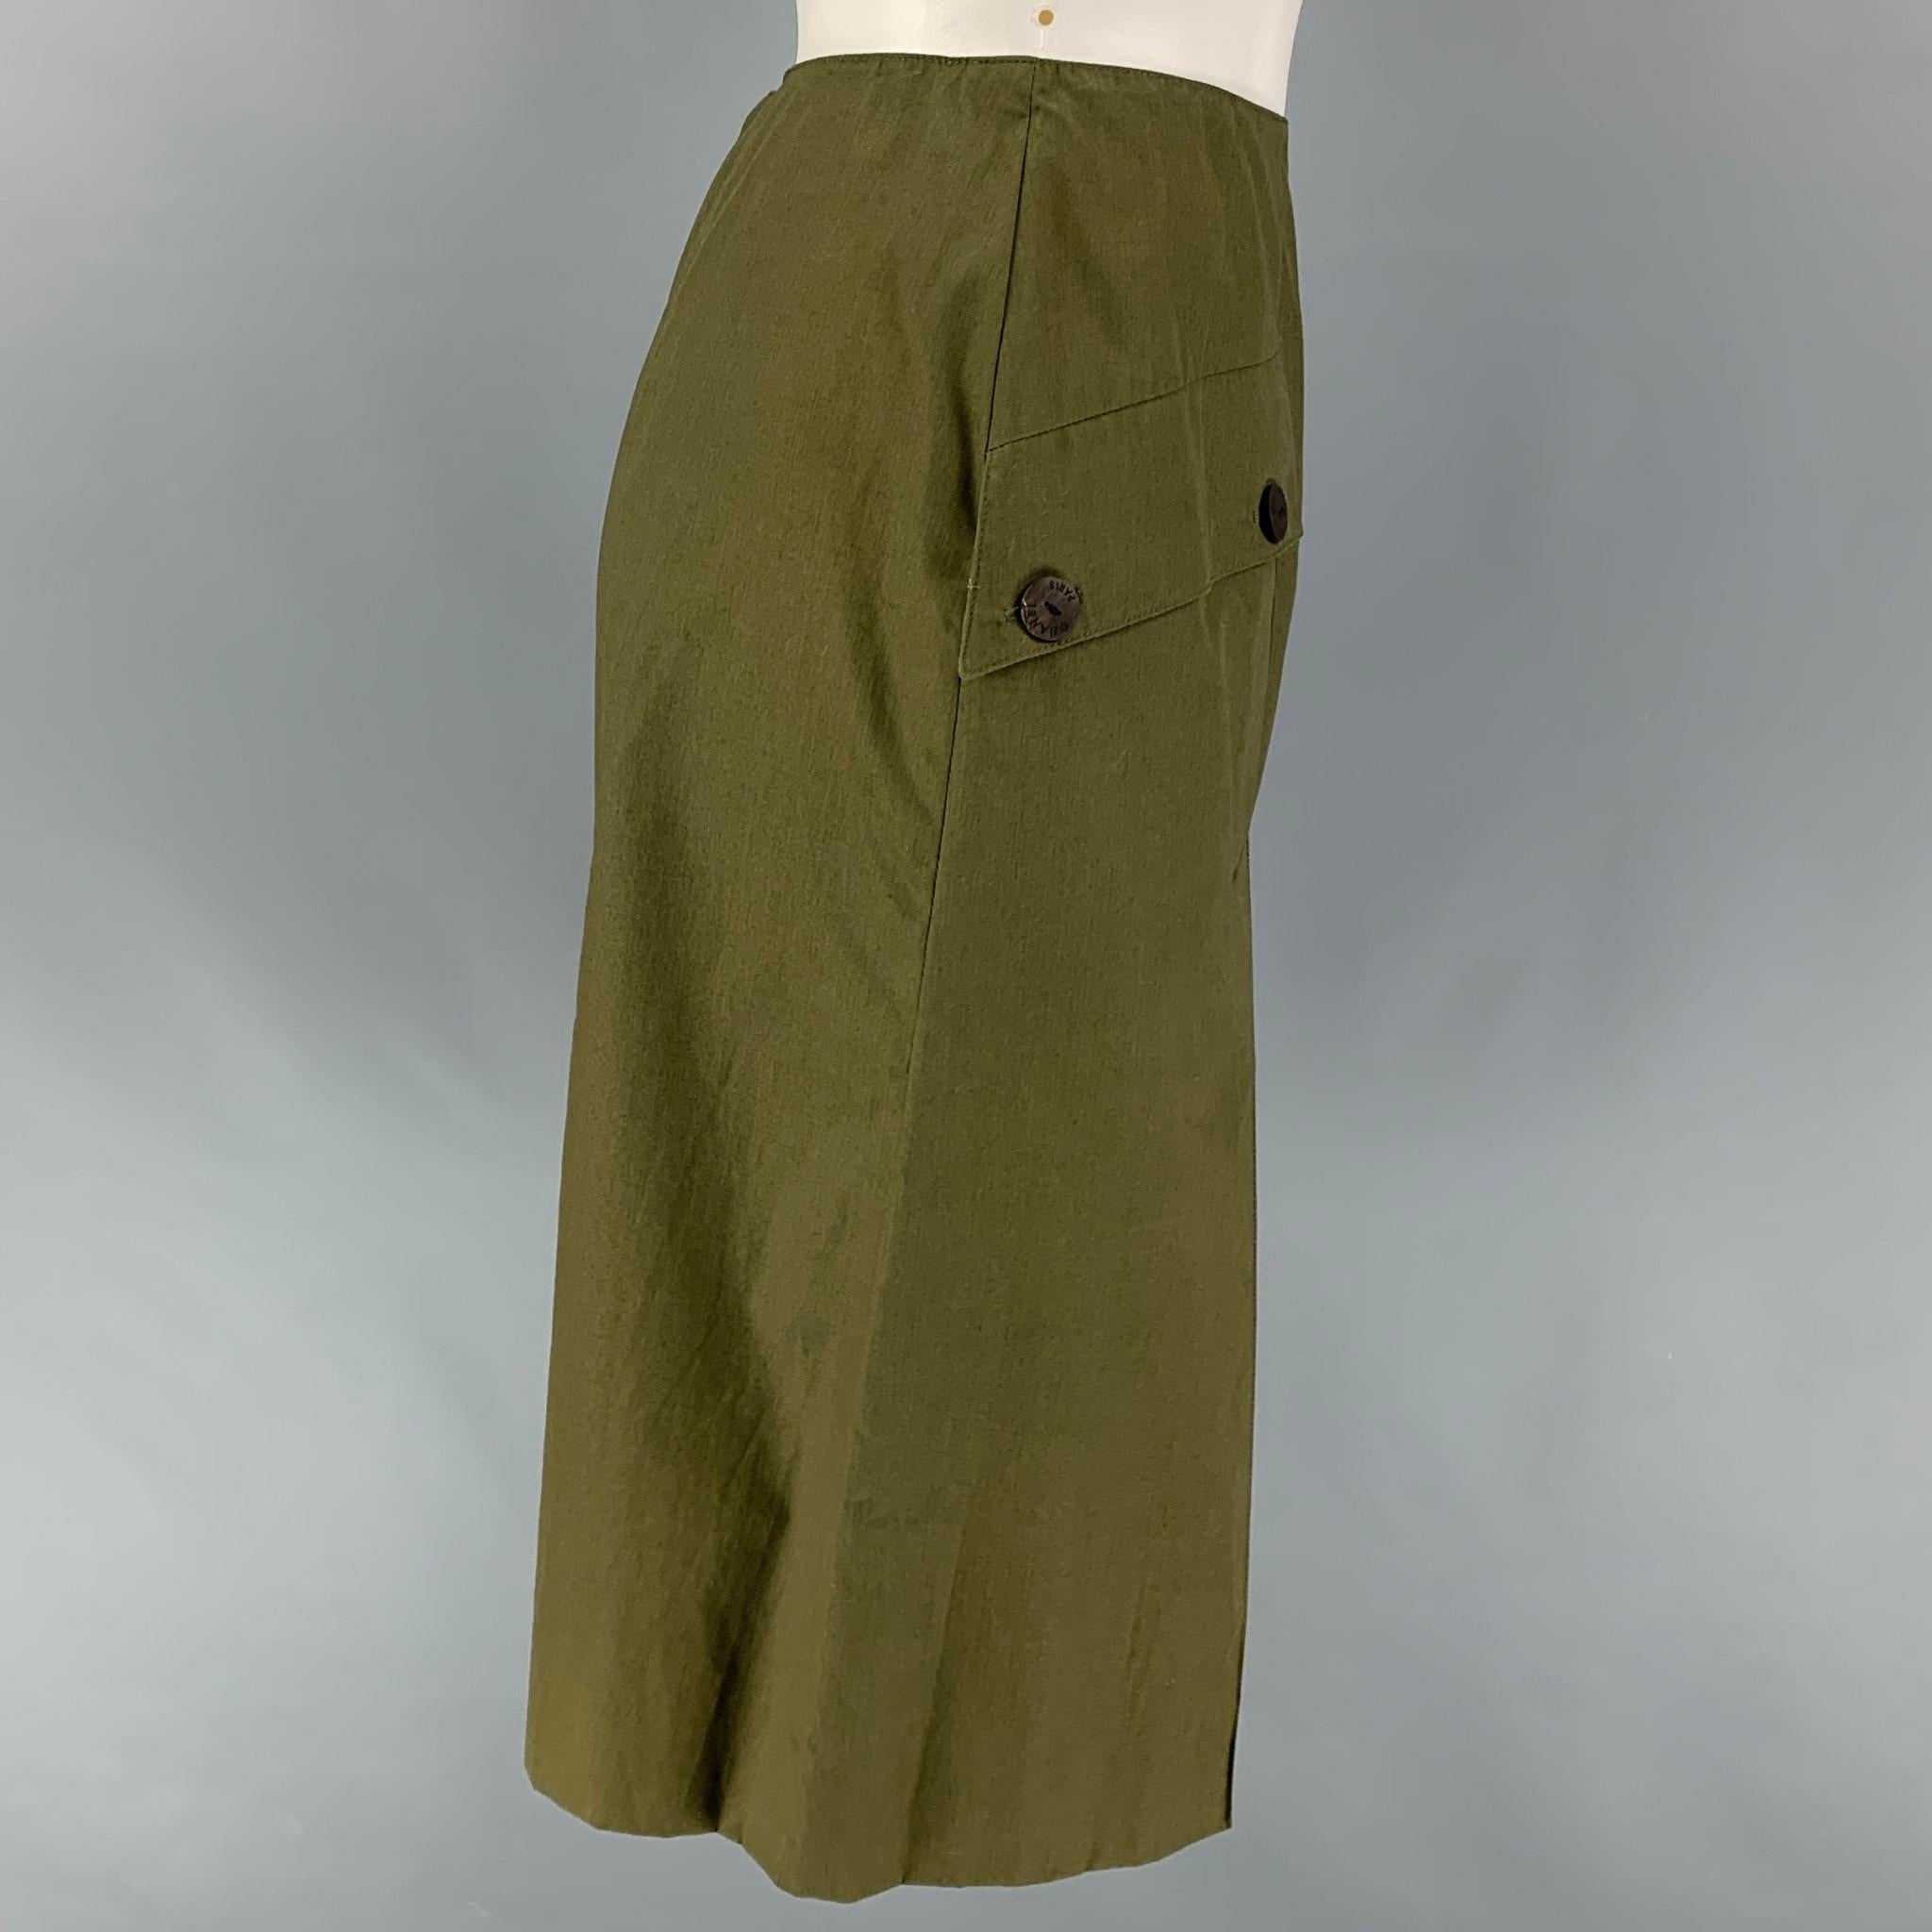 CHANEL skirt comes in a olive cotton featuring an a-line style, pleated detail, flap pockets, and a back zipper closure. Made in France. 

Very Good Pre-Owned Condition.
Marked: AF078 00C / 36

Measurements:

Waist: 24 in.
Hip: 34 in.
Length: 22 in.